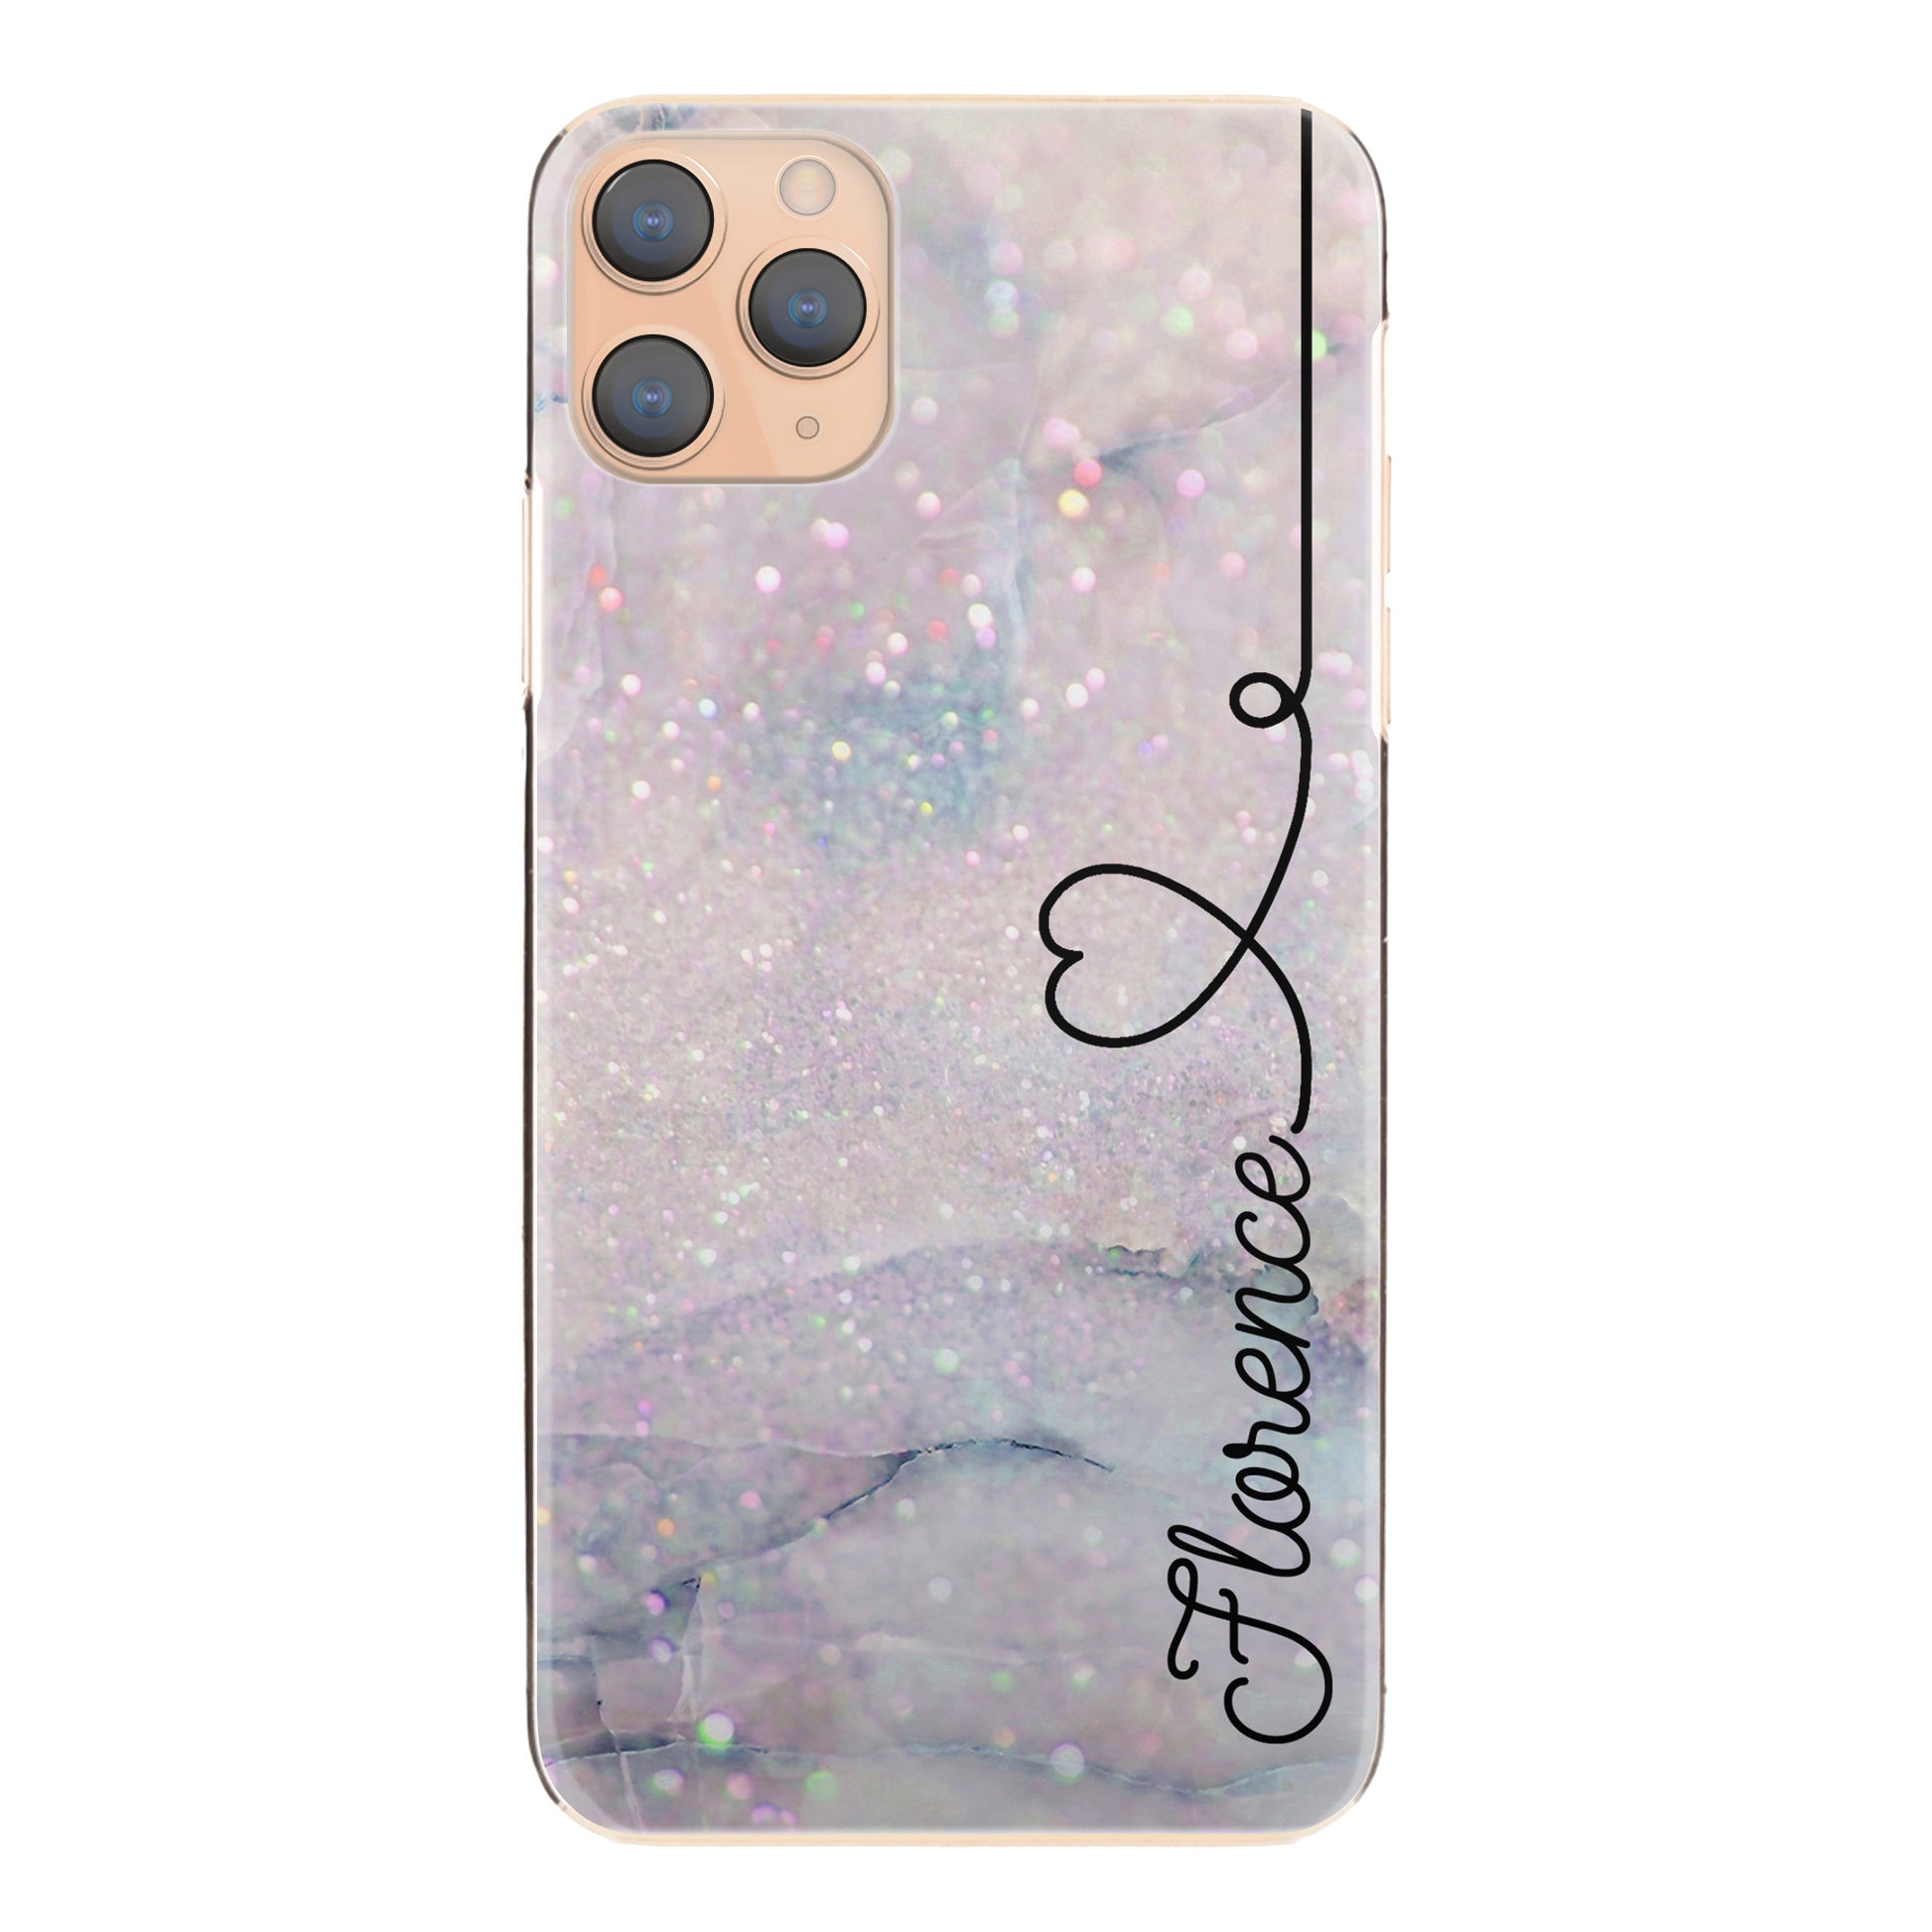 Personalised One Phone Hard Case with Stylish Text and Heart Line on Textured Glitter Effect